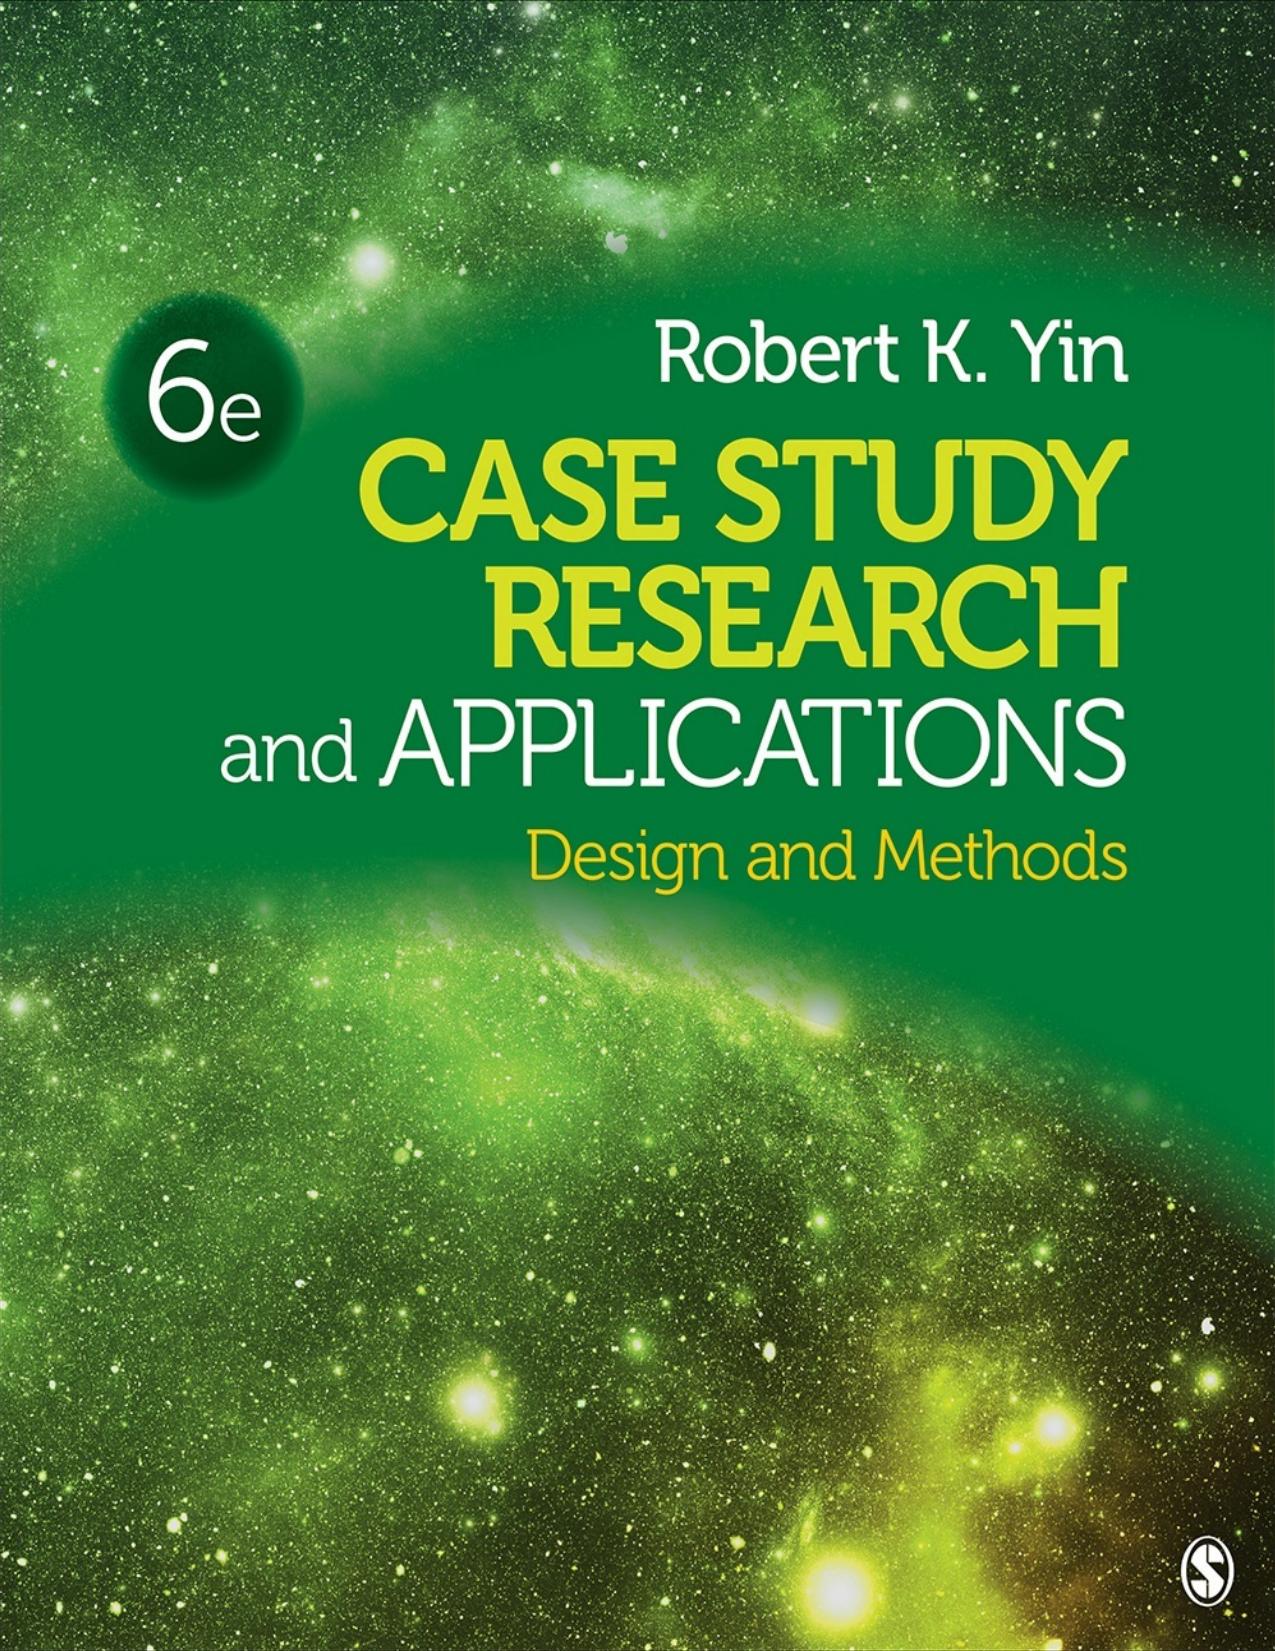 Case Study Research and Applications. Sixth Edition